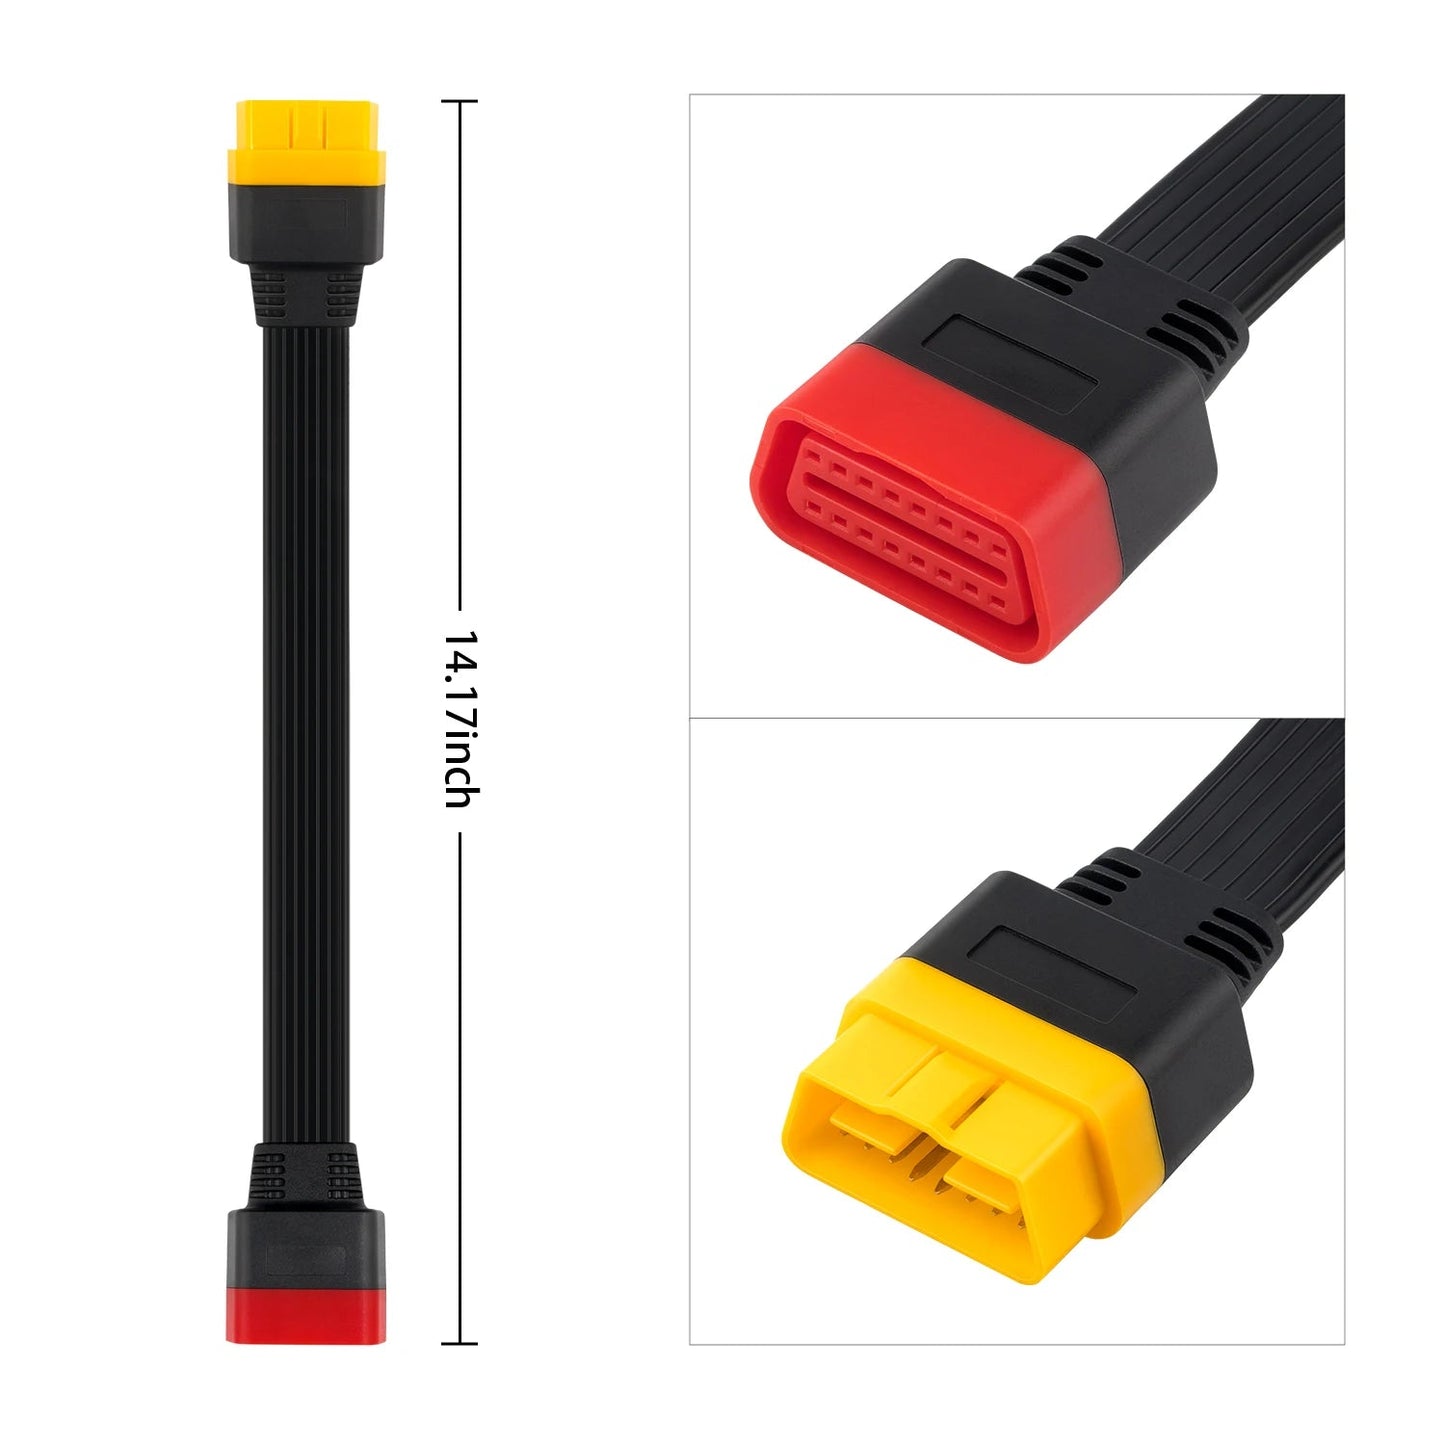 OBDII Extension cable 16 Pin Male To Female for thinkdiag Easydiag BD2 Connector 16Pin diagnostic tool ELM327 OBD2 Cable - Dynamex